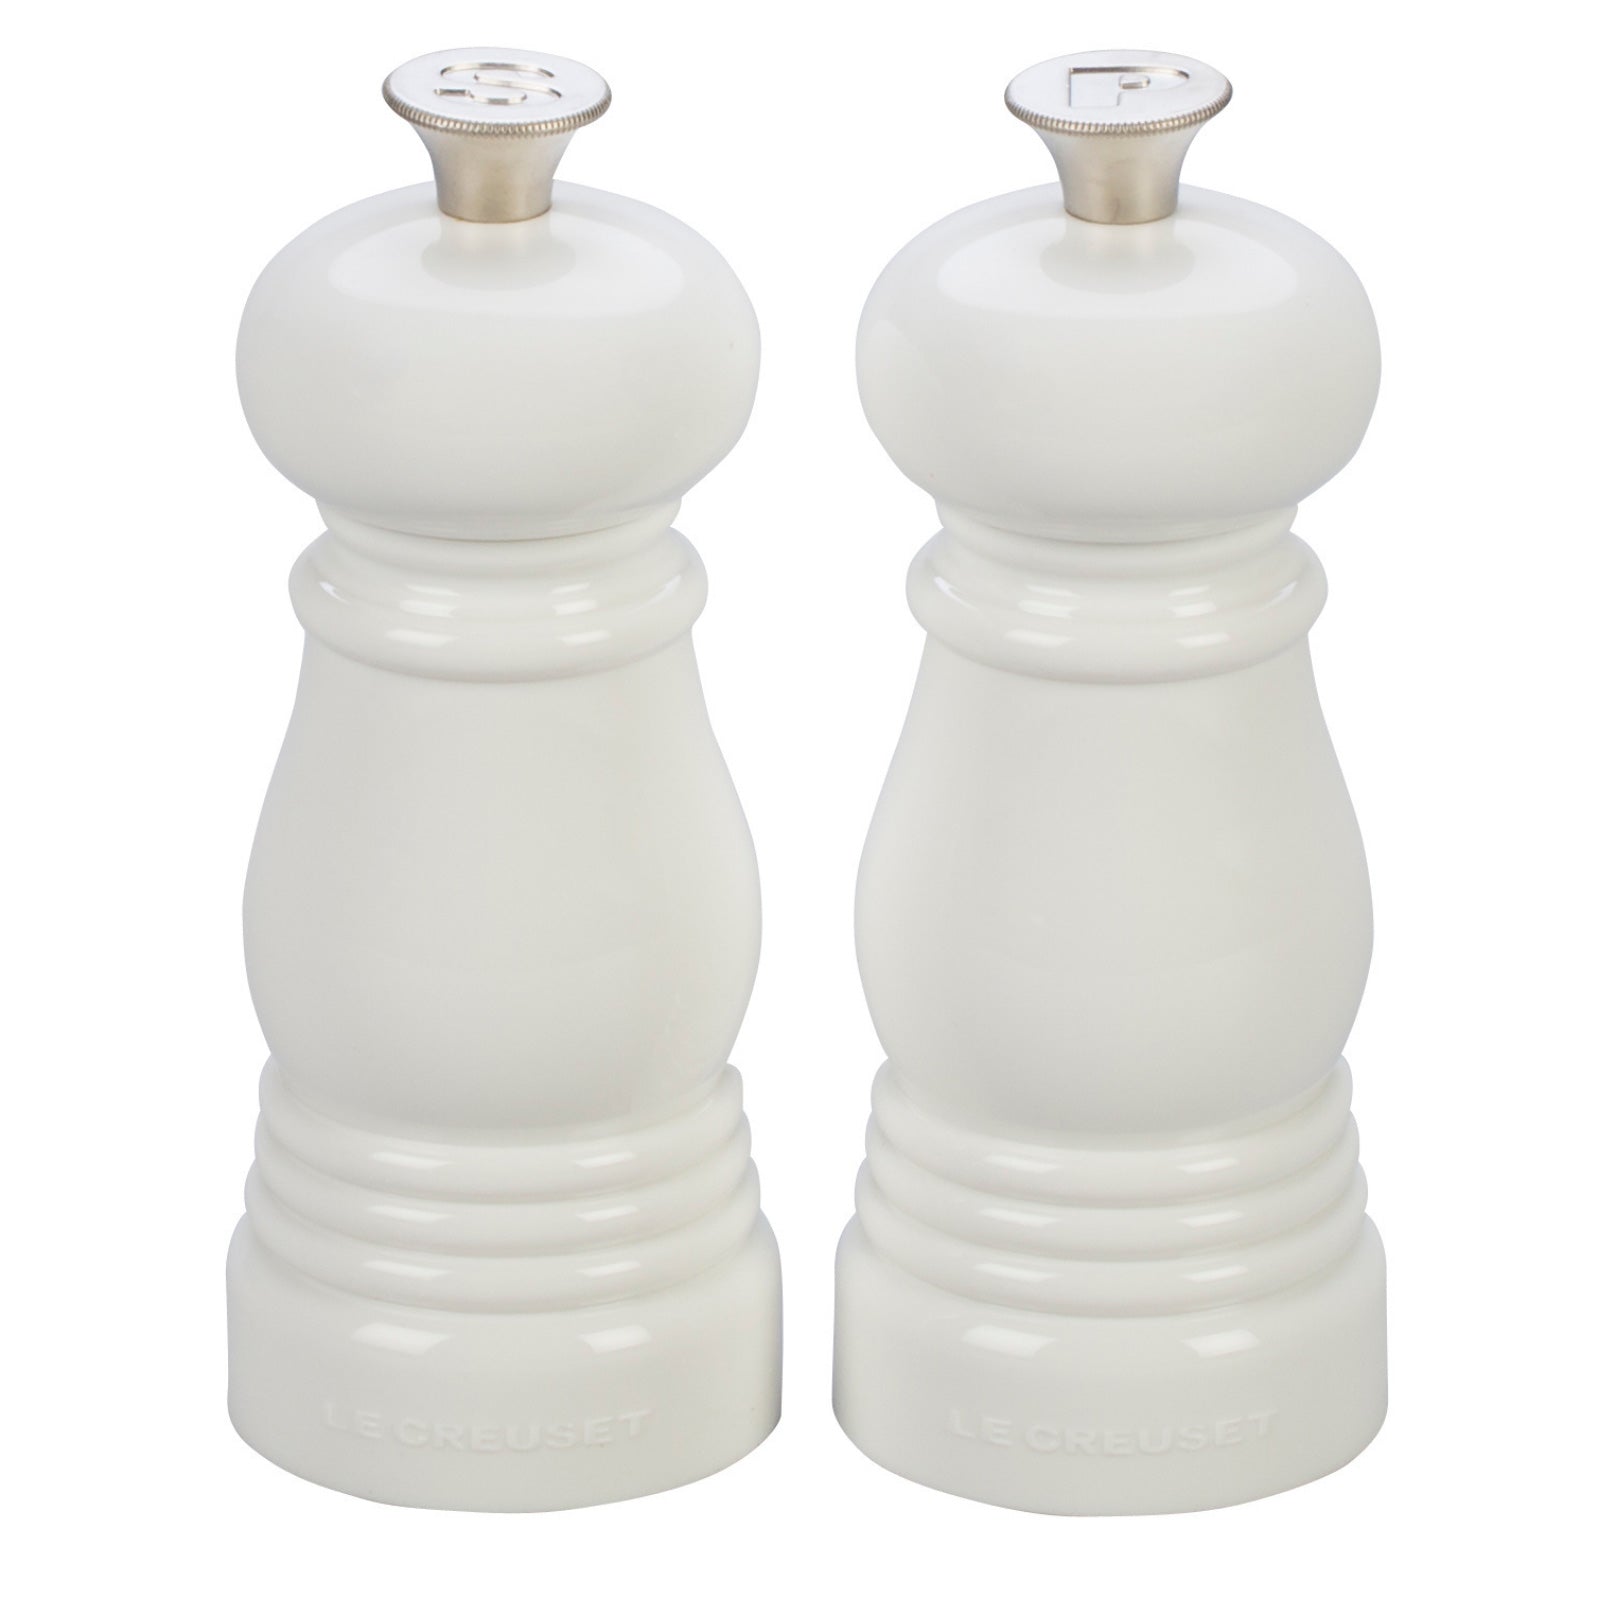 Le Creuset Salt and Pepper Mill Set | Marble